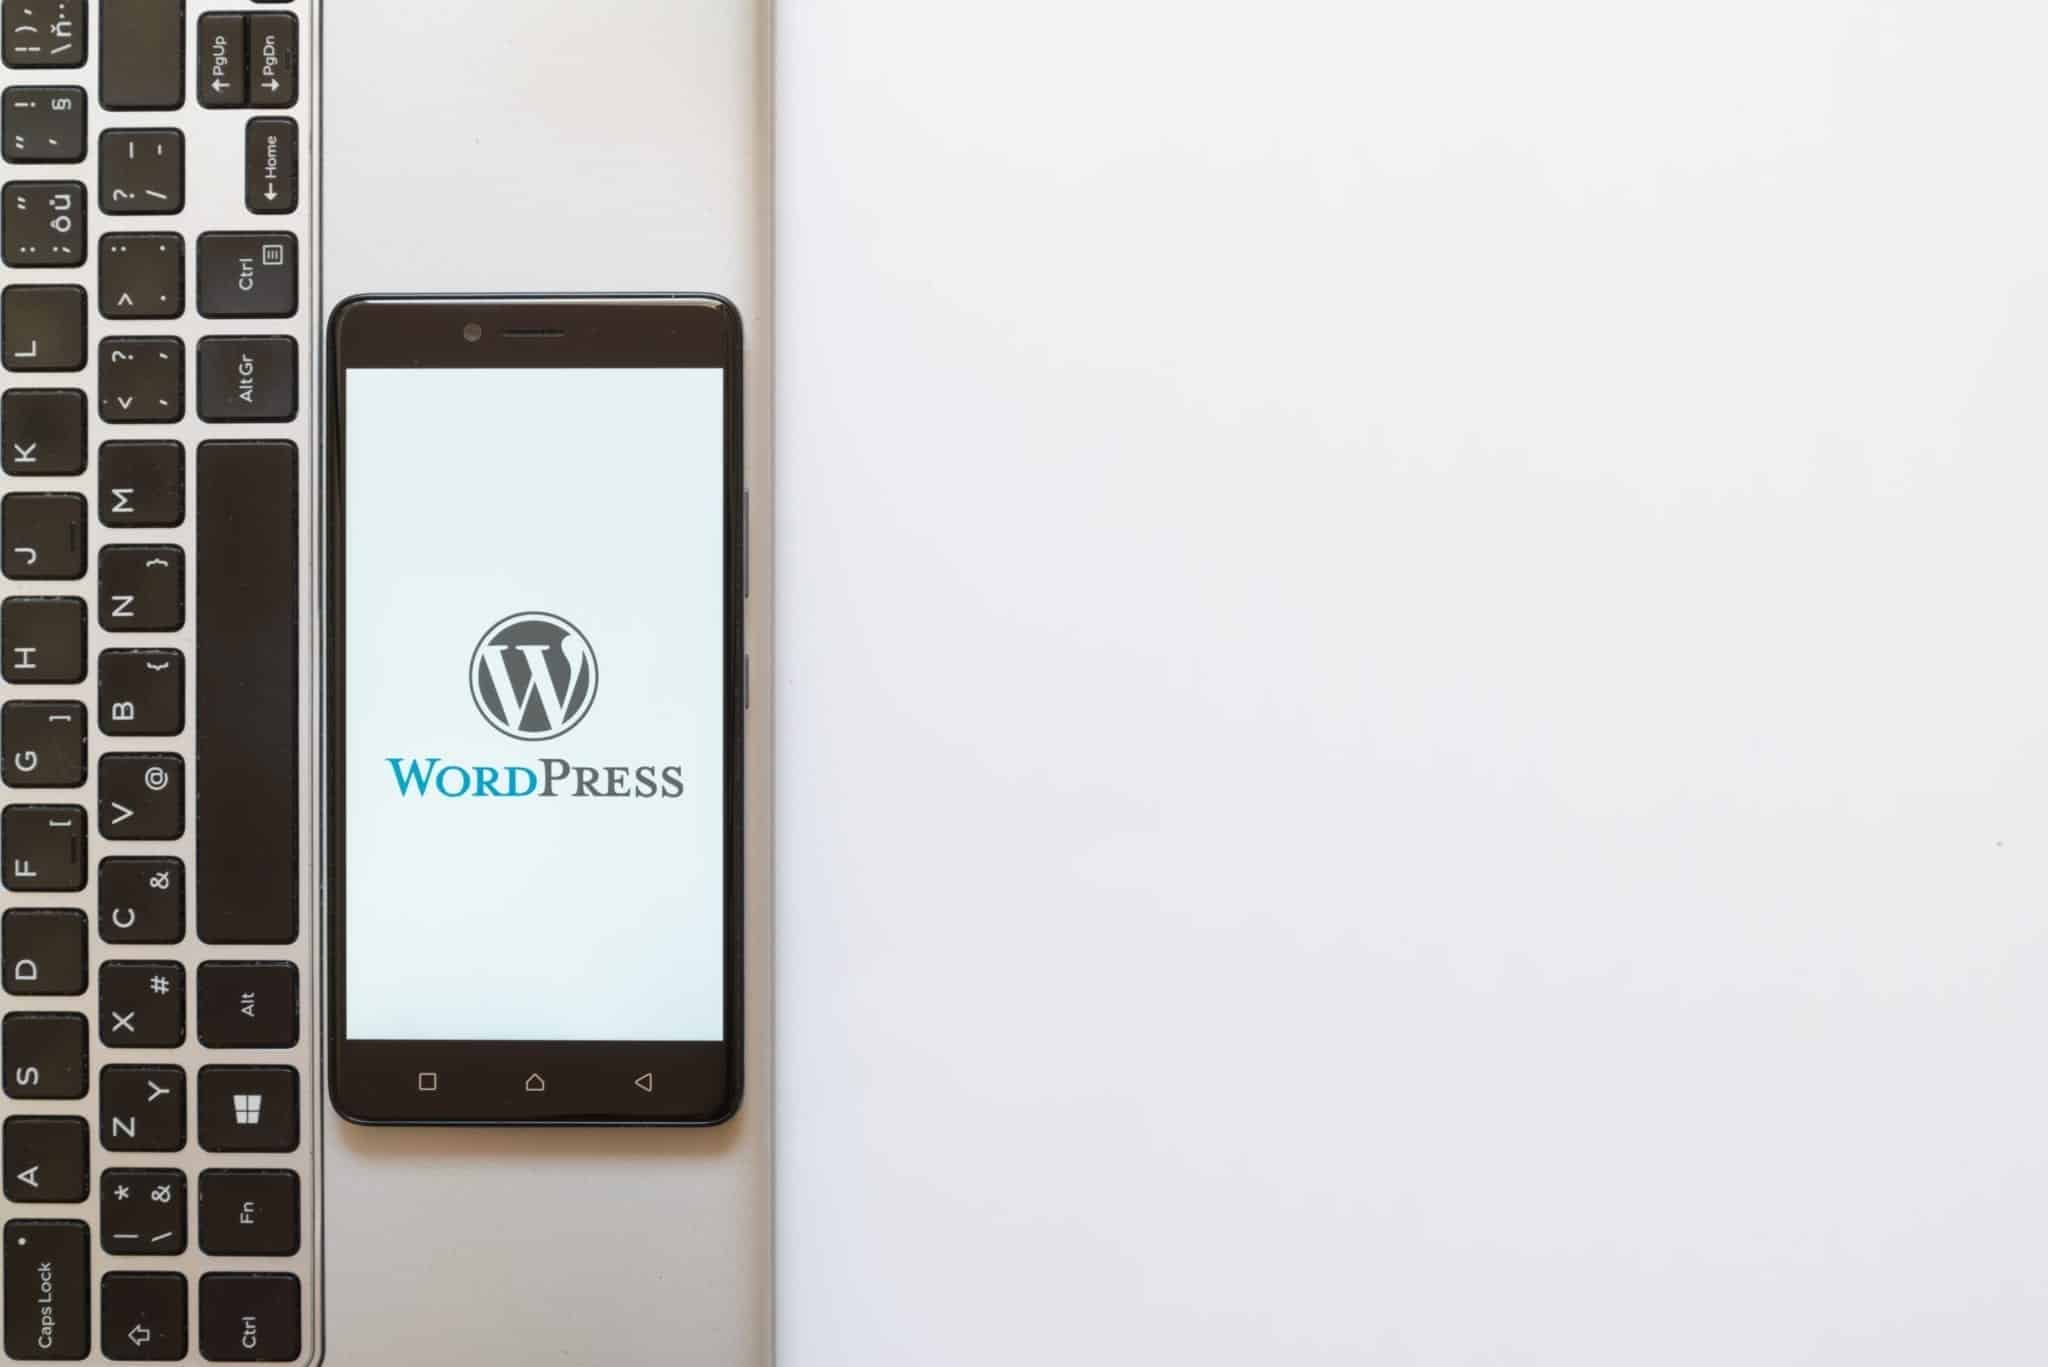 Why WordPress is the best content management system and platform to use when building websites, according to our Manchester website design company.